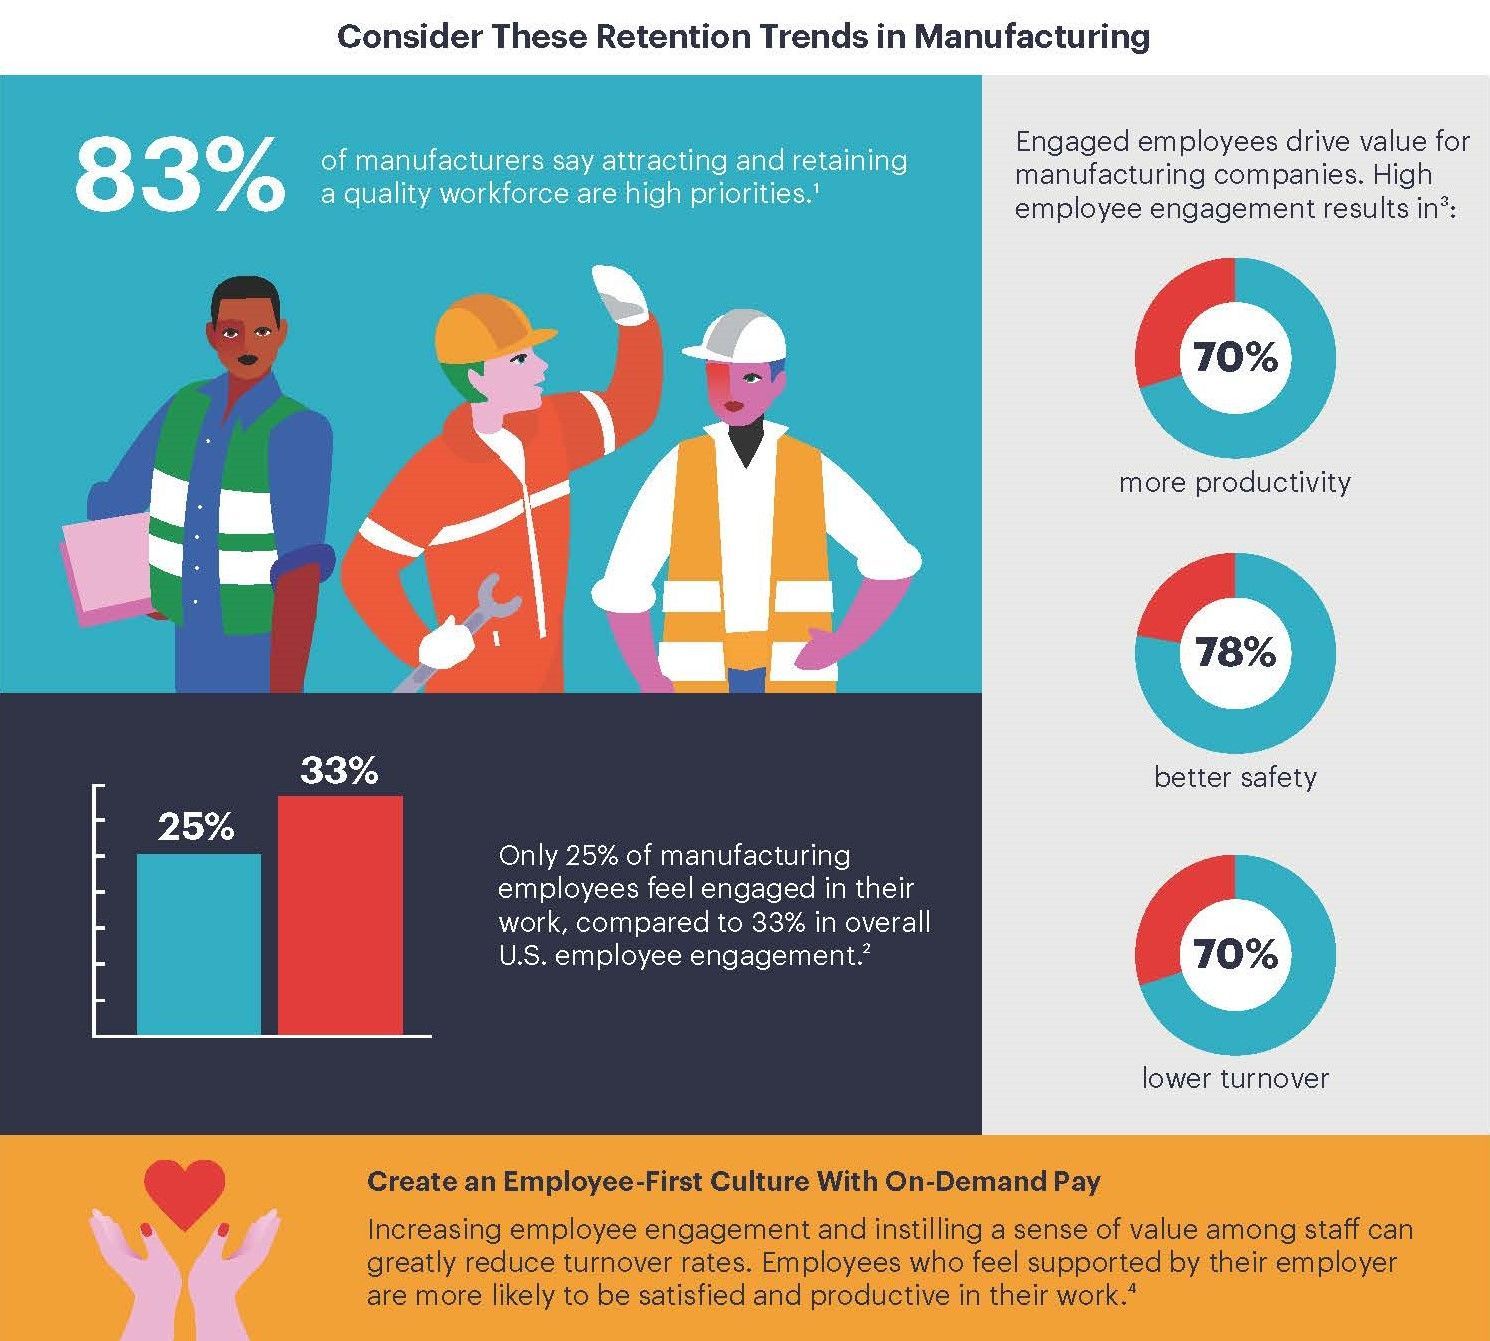 Graphic explaining retention trends in manufacturing. 83% of manufacturers say attracting and retaining a quality workforce are high priorities. 